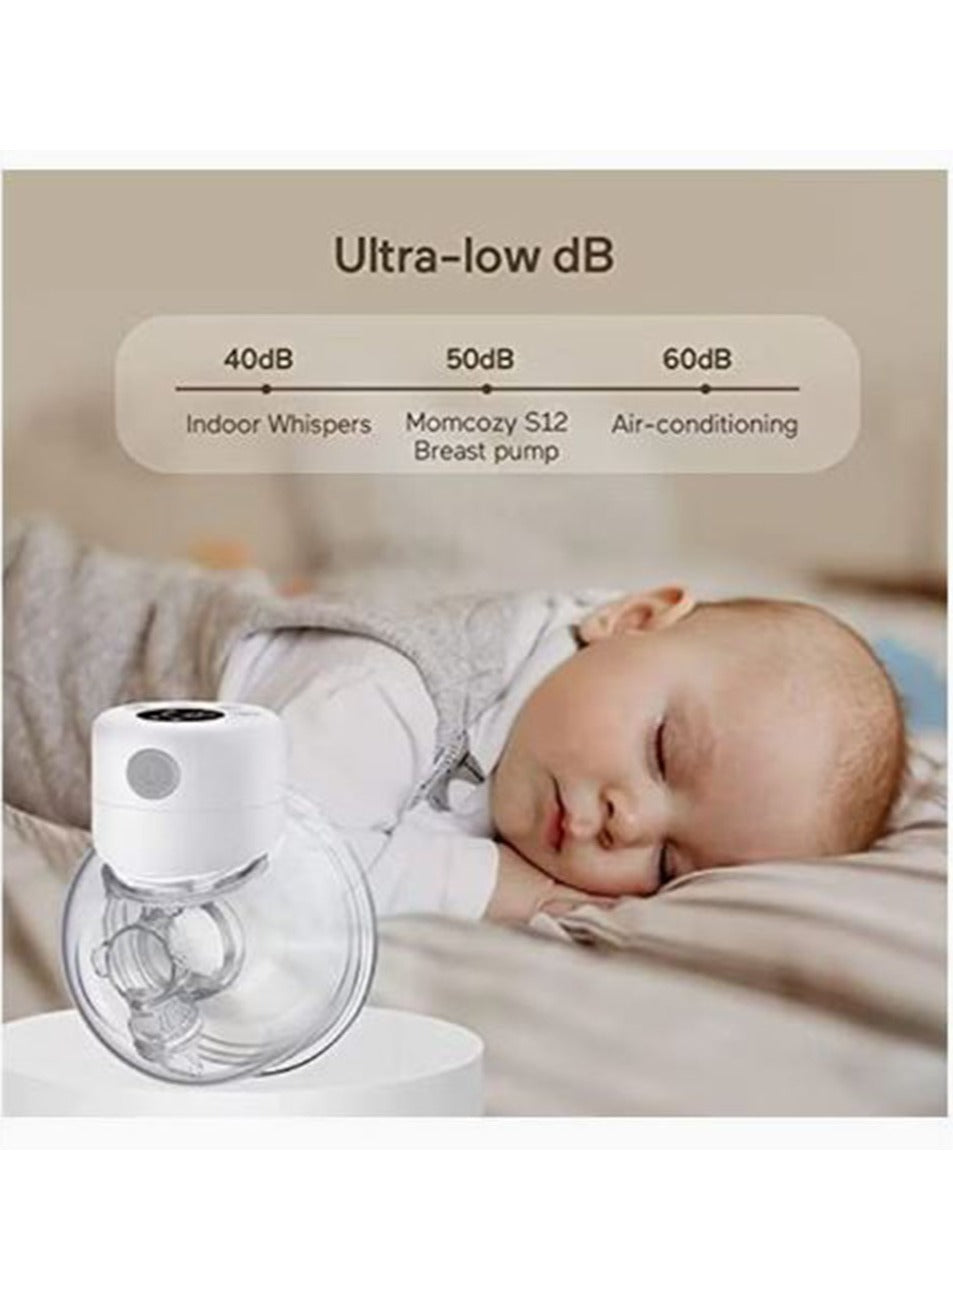 Wearable Breast Pump, Hands Free Breast Pump, Low Noise & Painless, 2 Modes & 9 Levels Electric Breast Pump Portable.